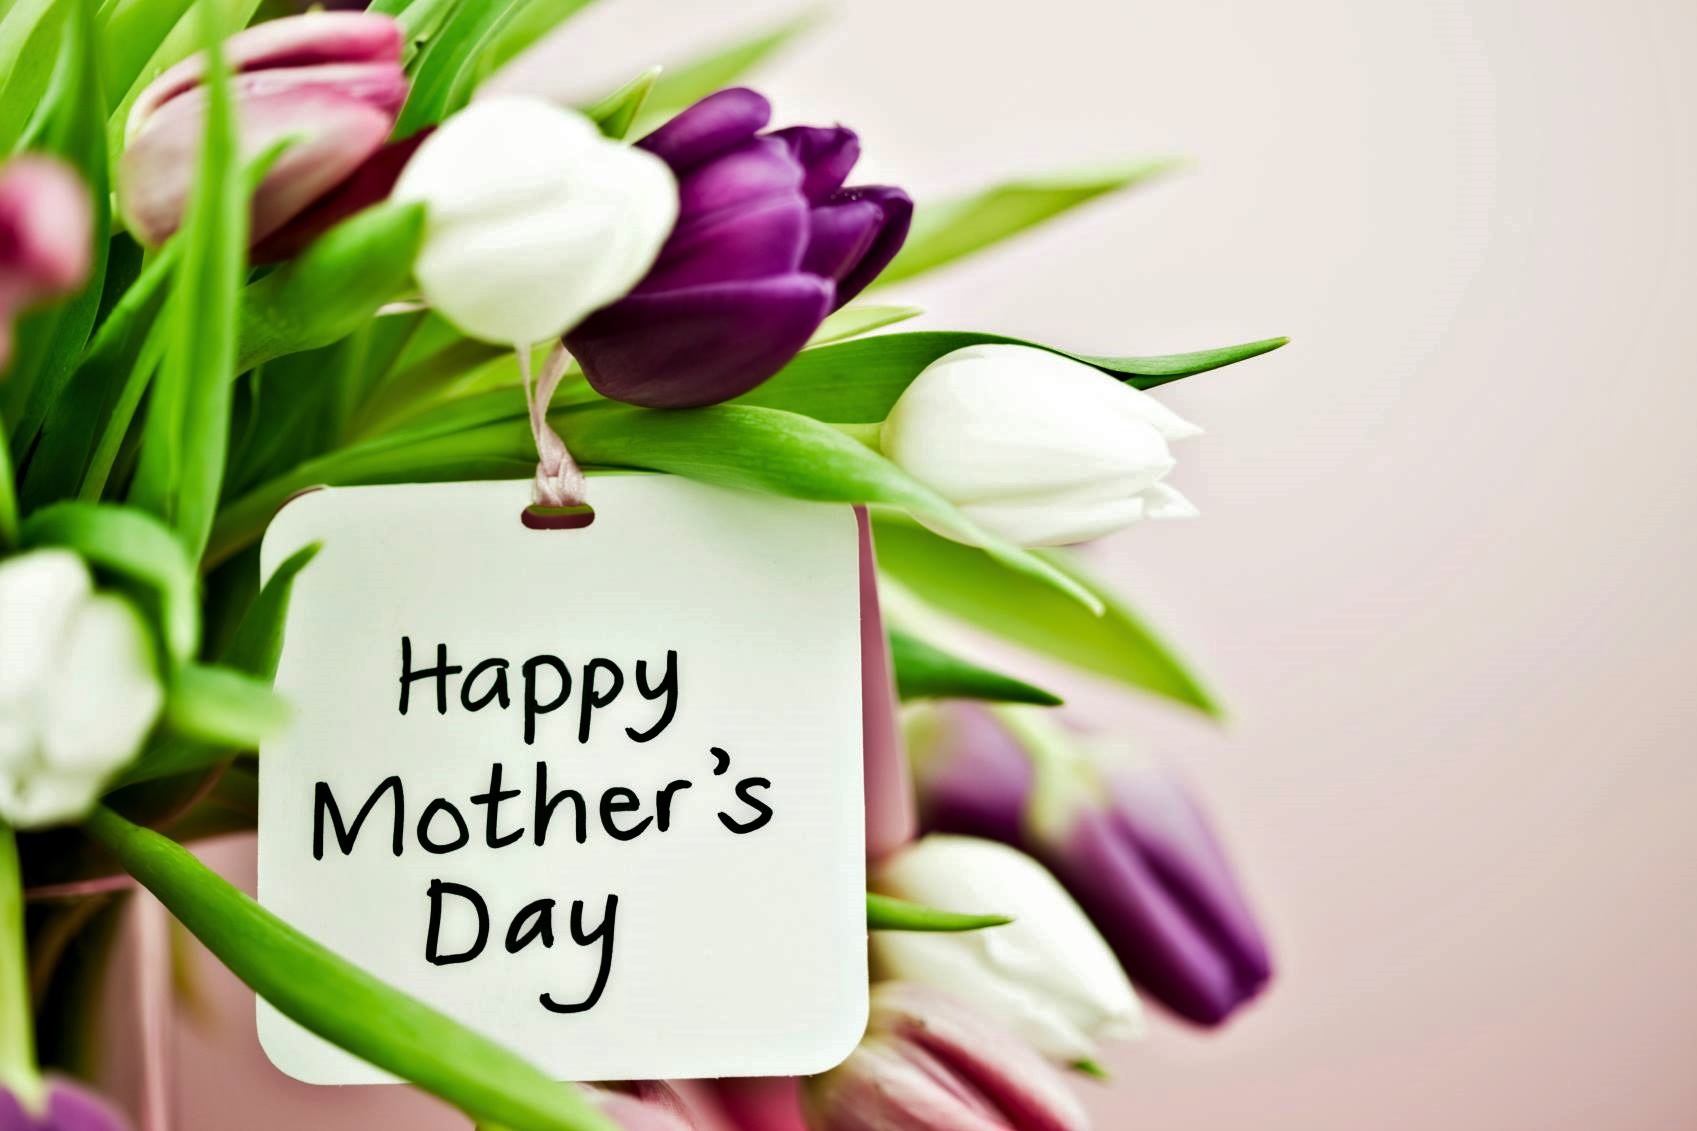 Making Mom Smile: The Art of Sending Happy Mother's Day Flowers